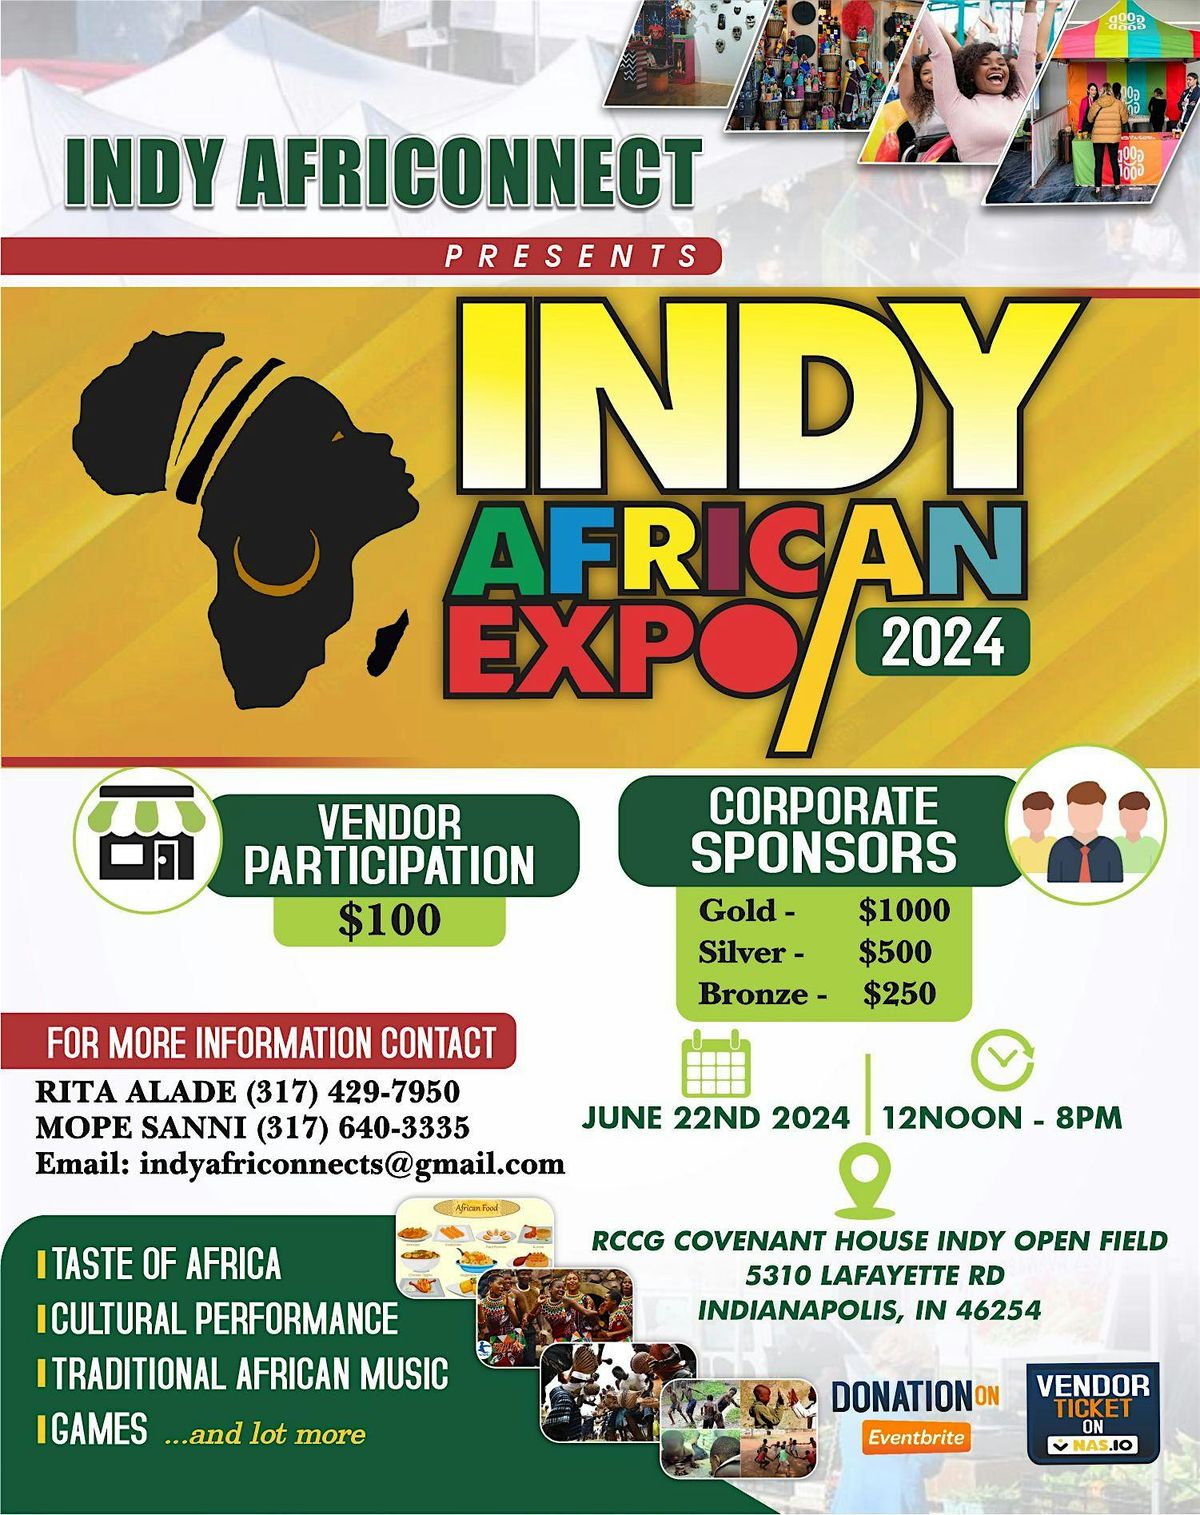 INDY AFRICAN EXPO